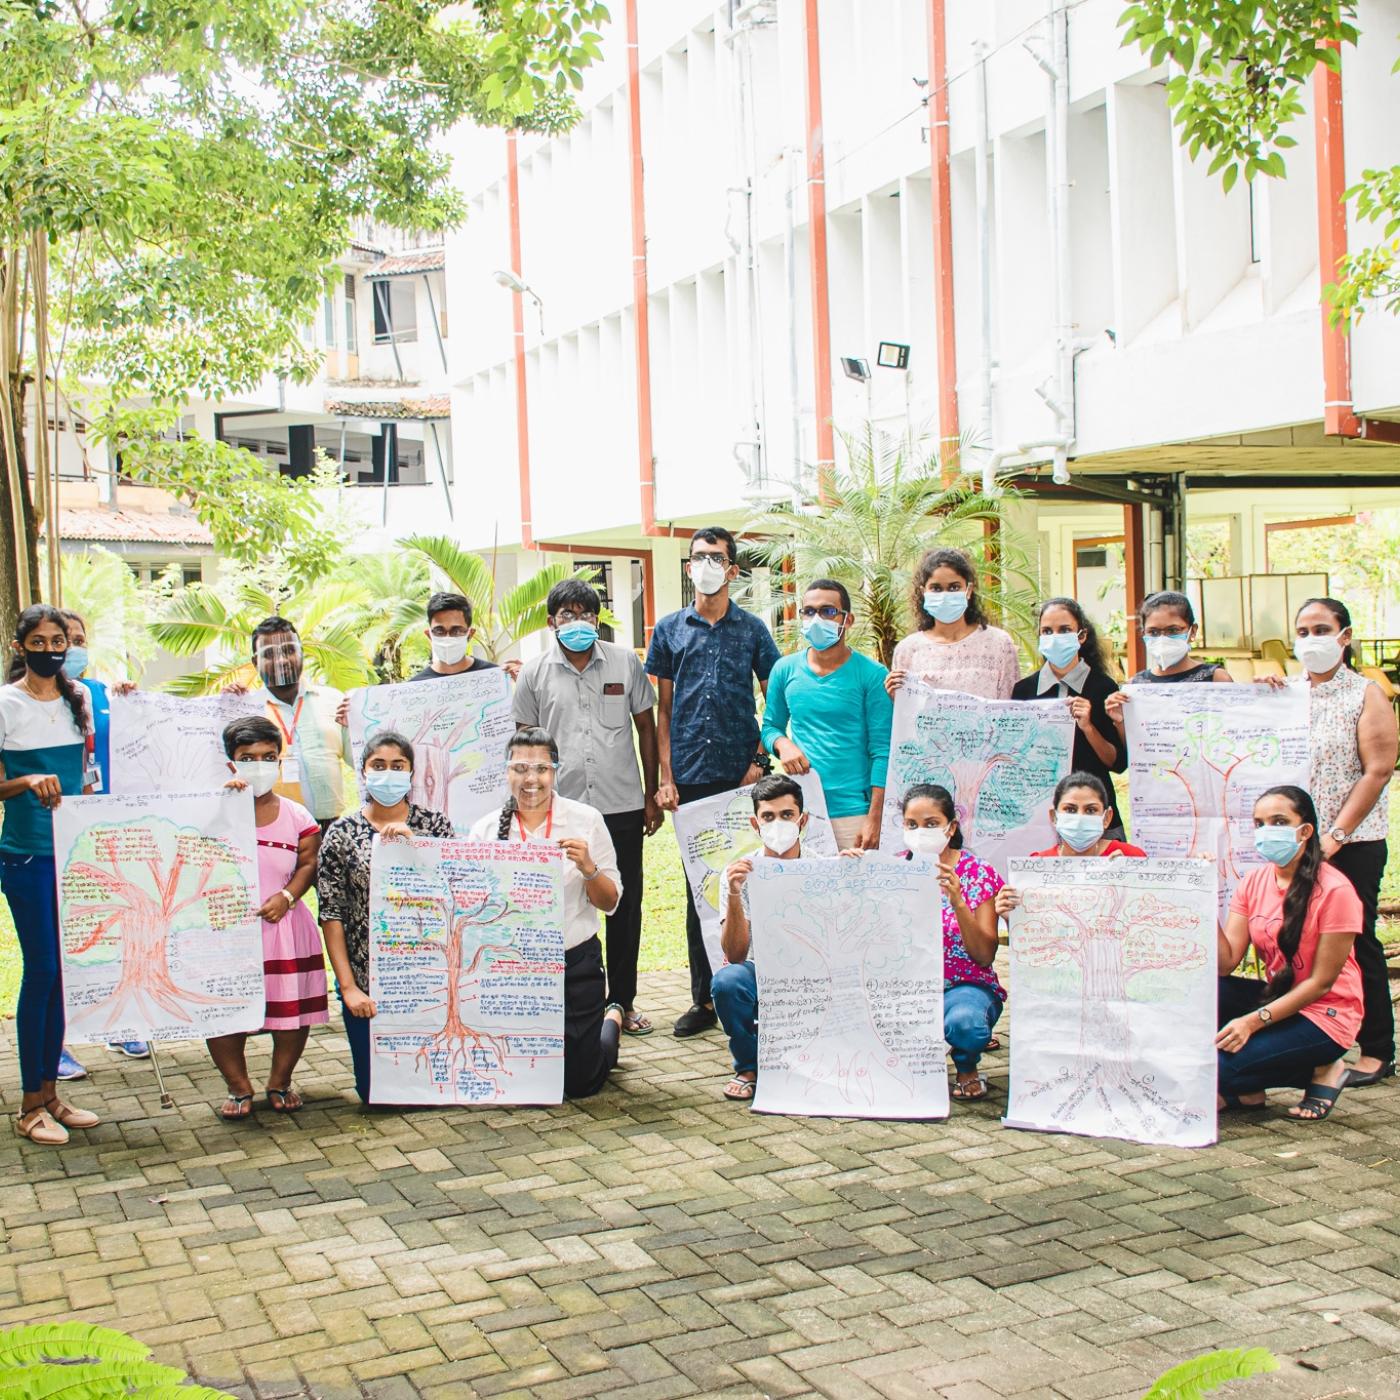 ENGAGE participants in Sri Lanka with signs